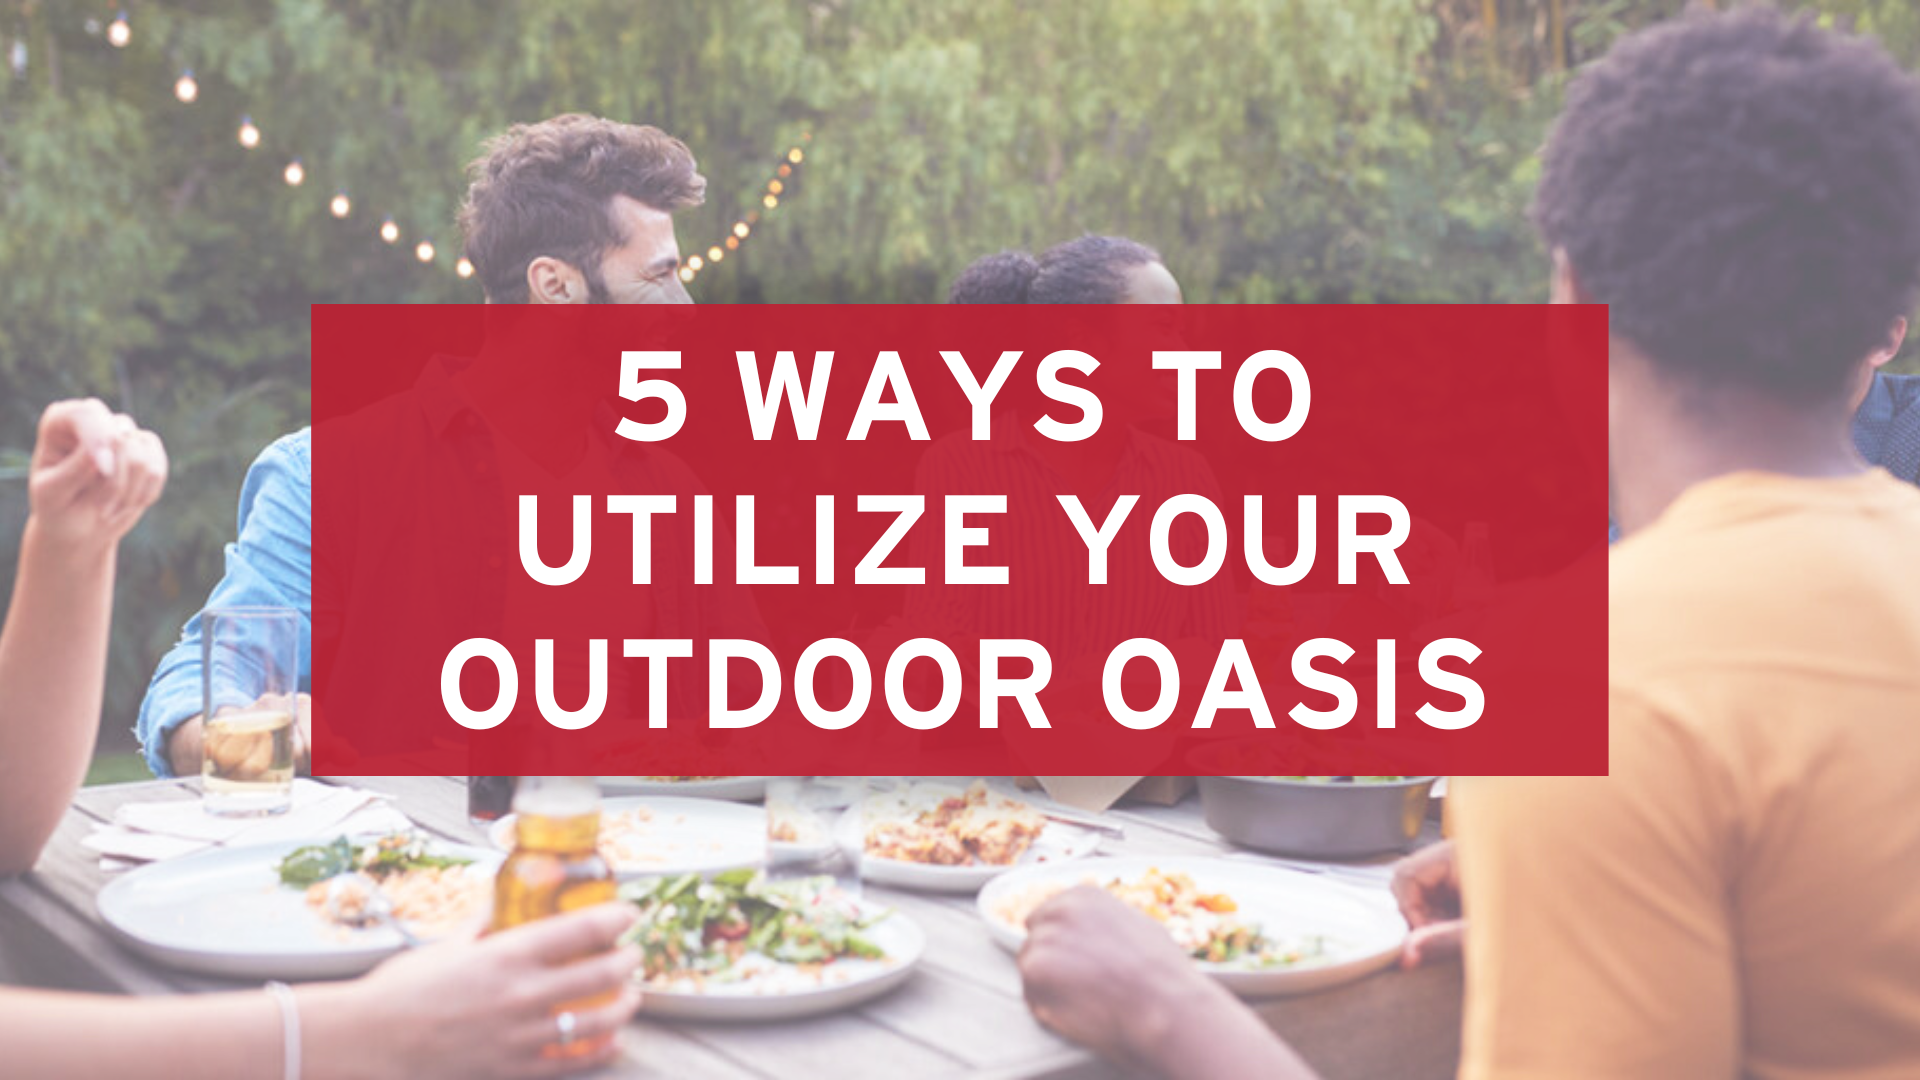 Backyard Bliss: 5 Epic Ways to Utilize Your Outdoor Oasis!